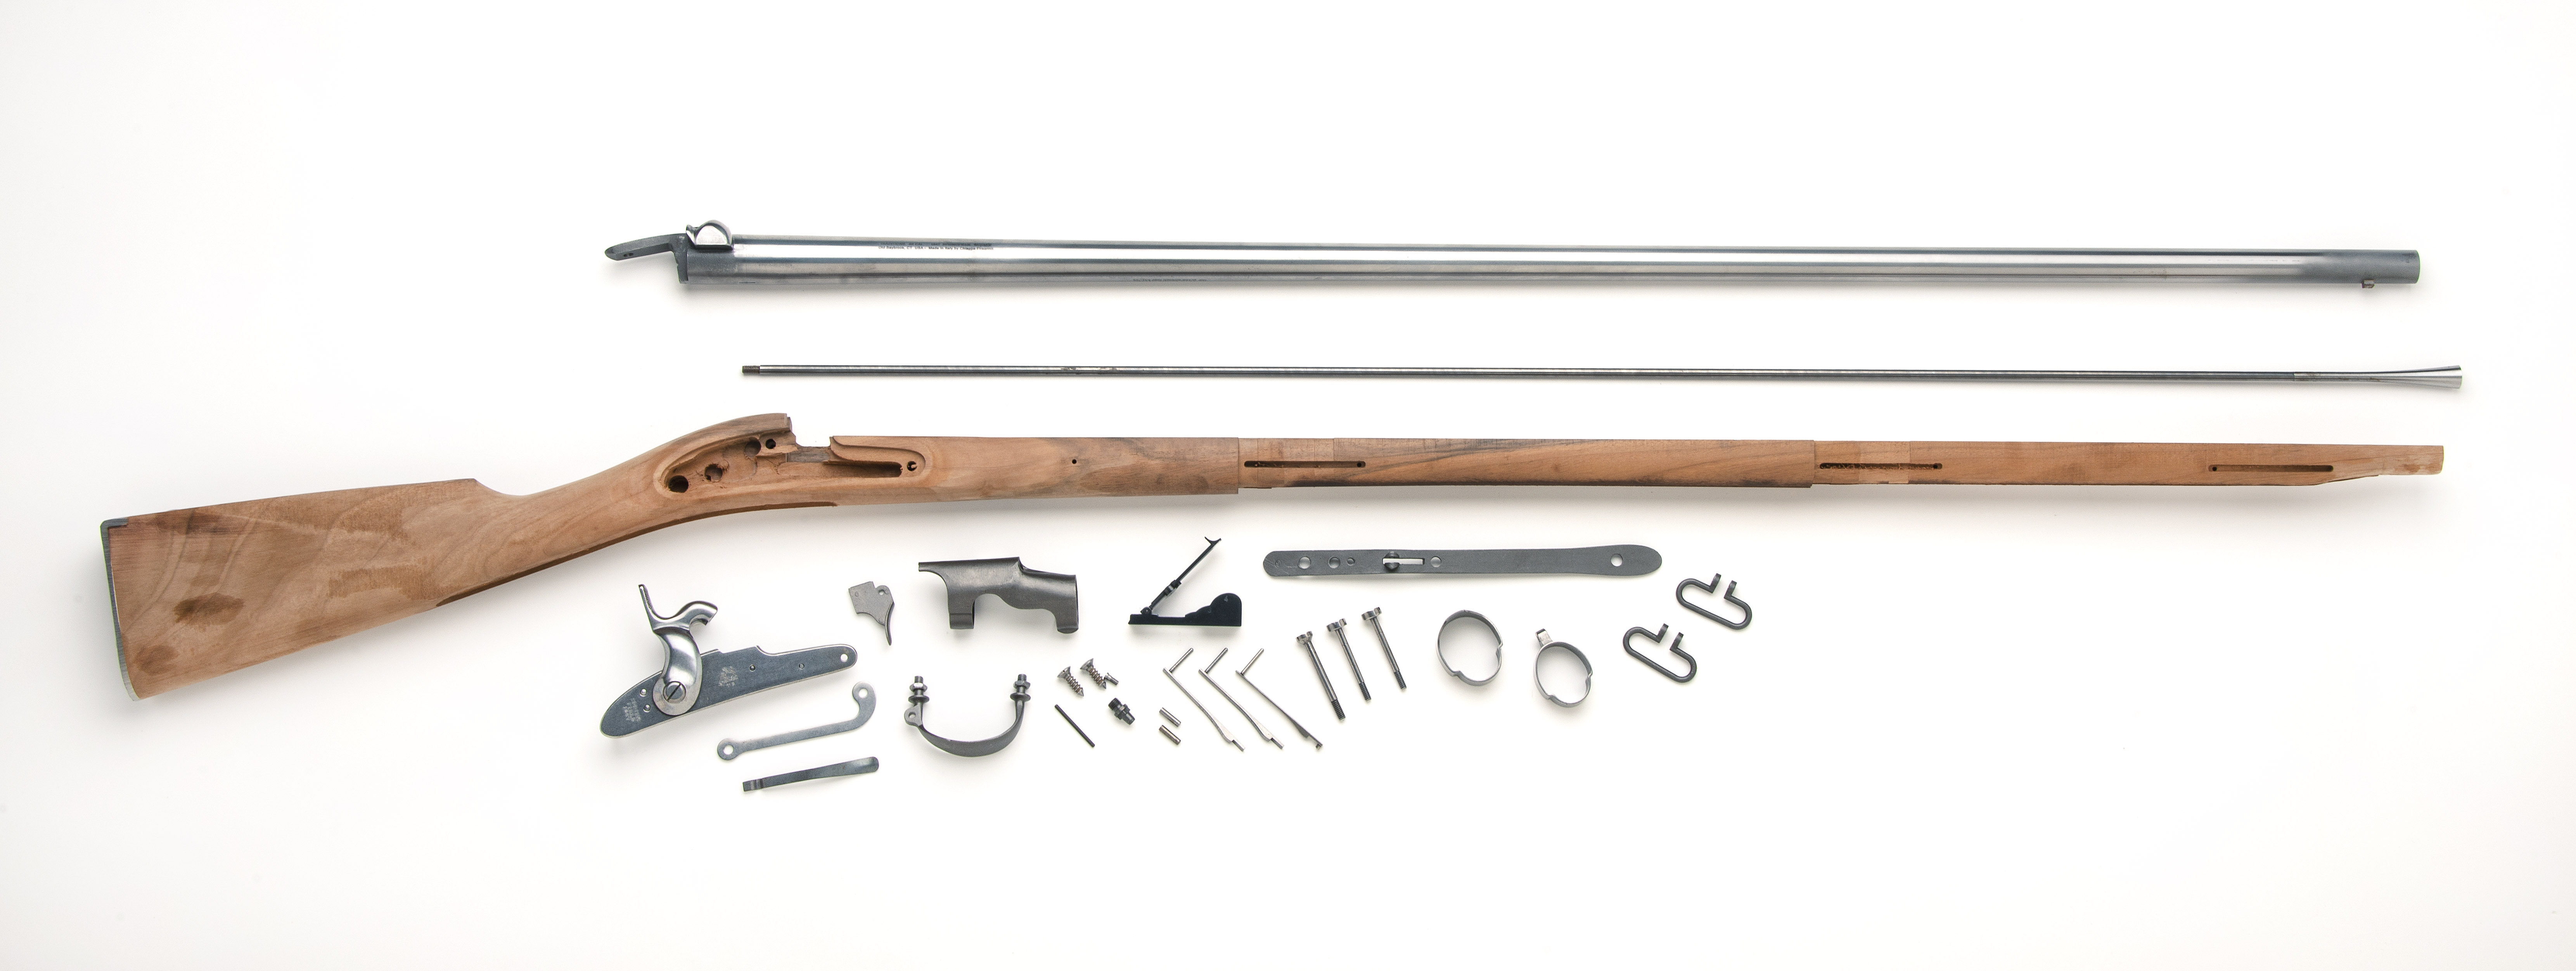 1842 Springfield Musket .69 Caliber Rifled Build It Yourself Kit KR6184205